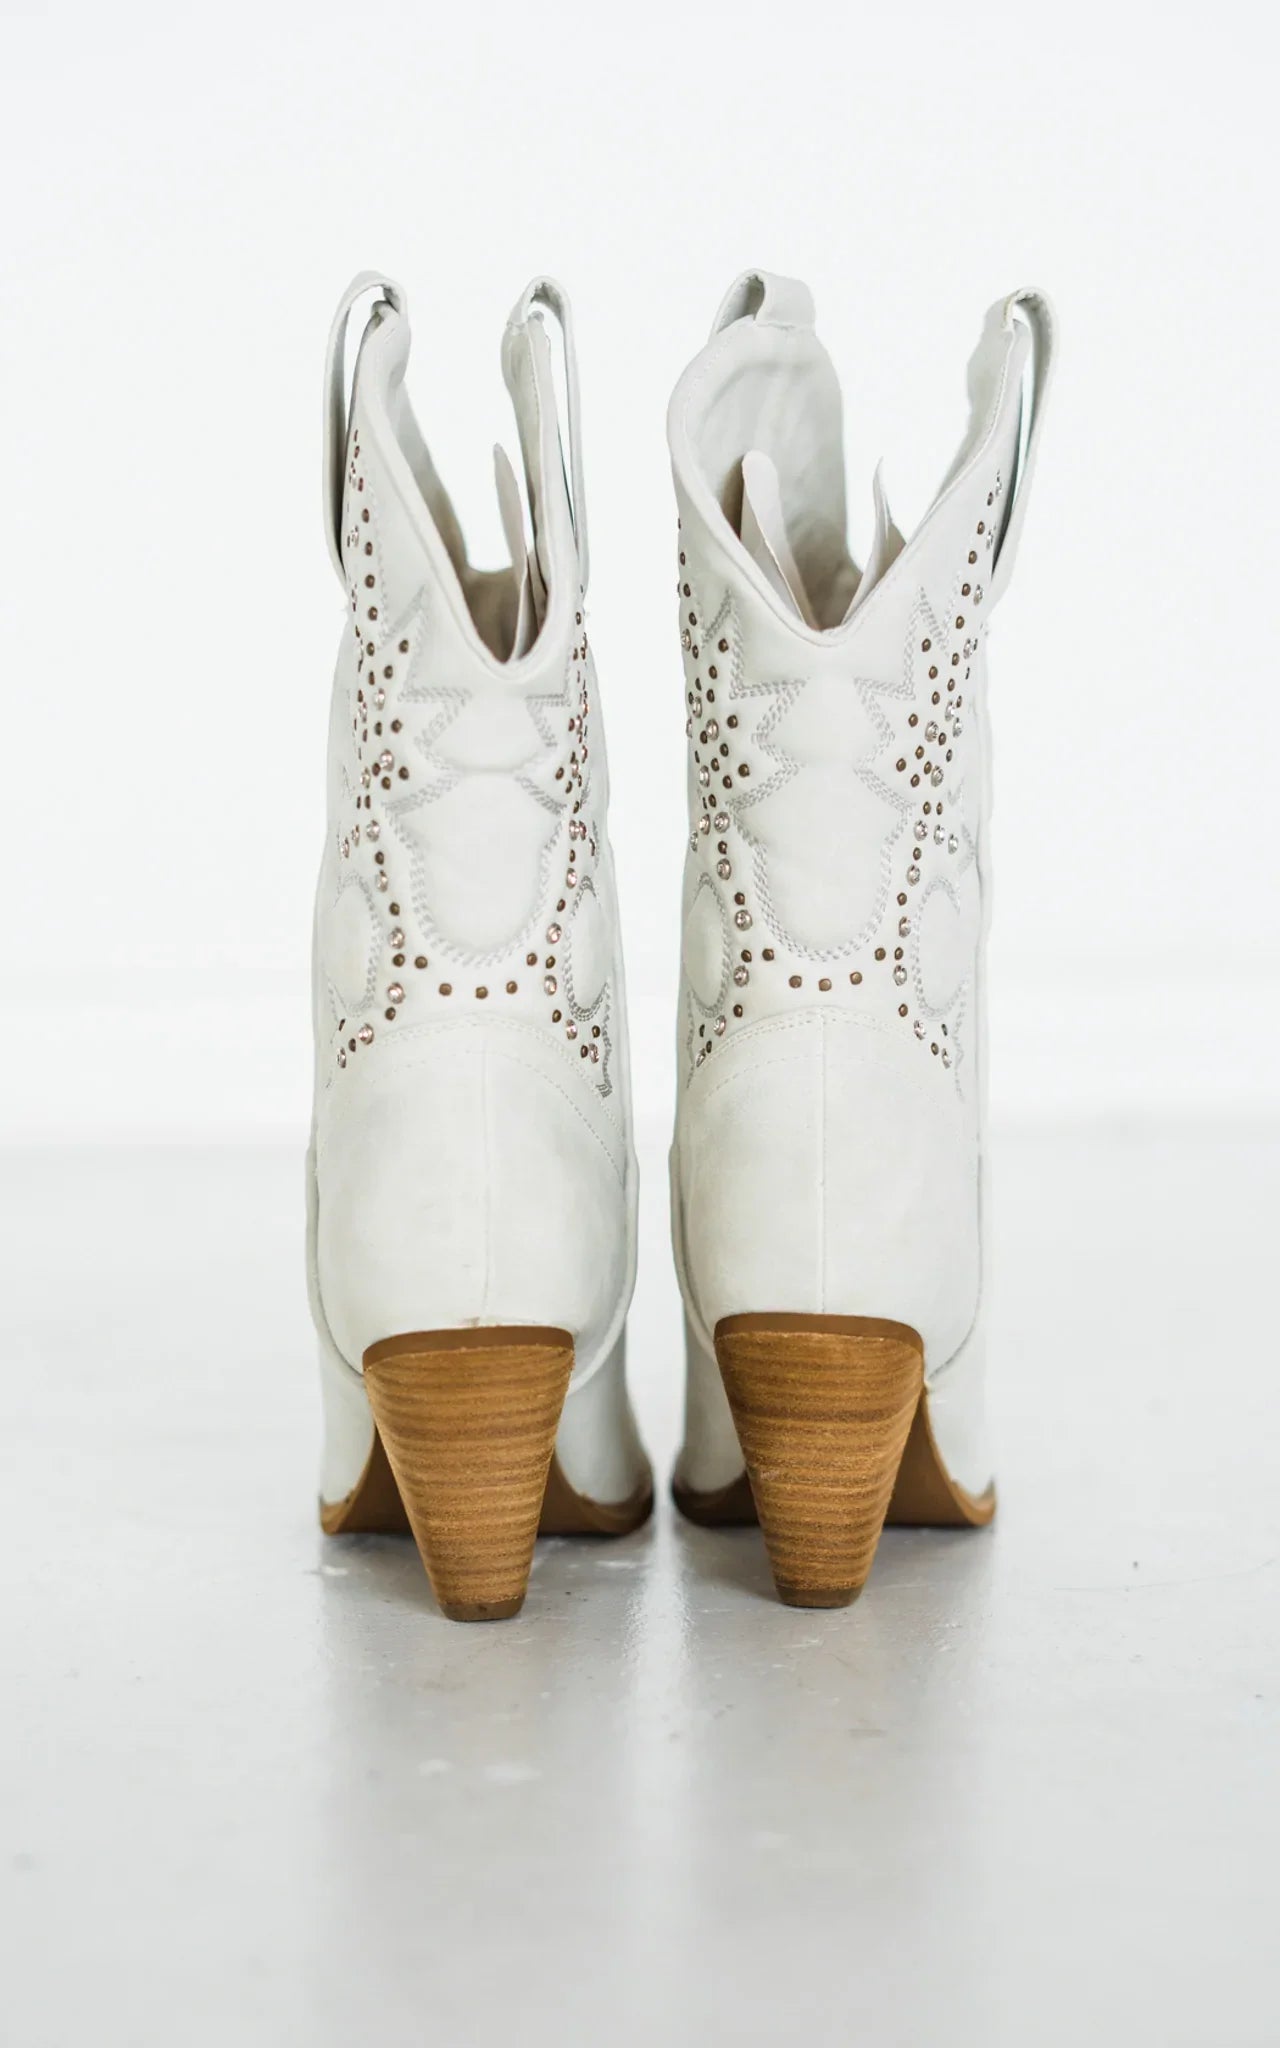 Houston Western Boots in White